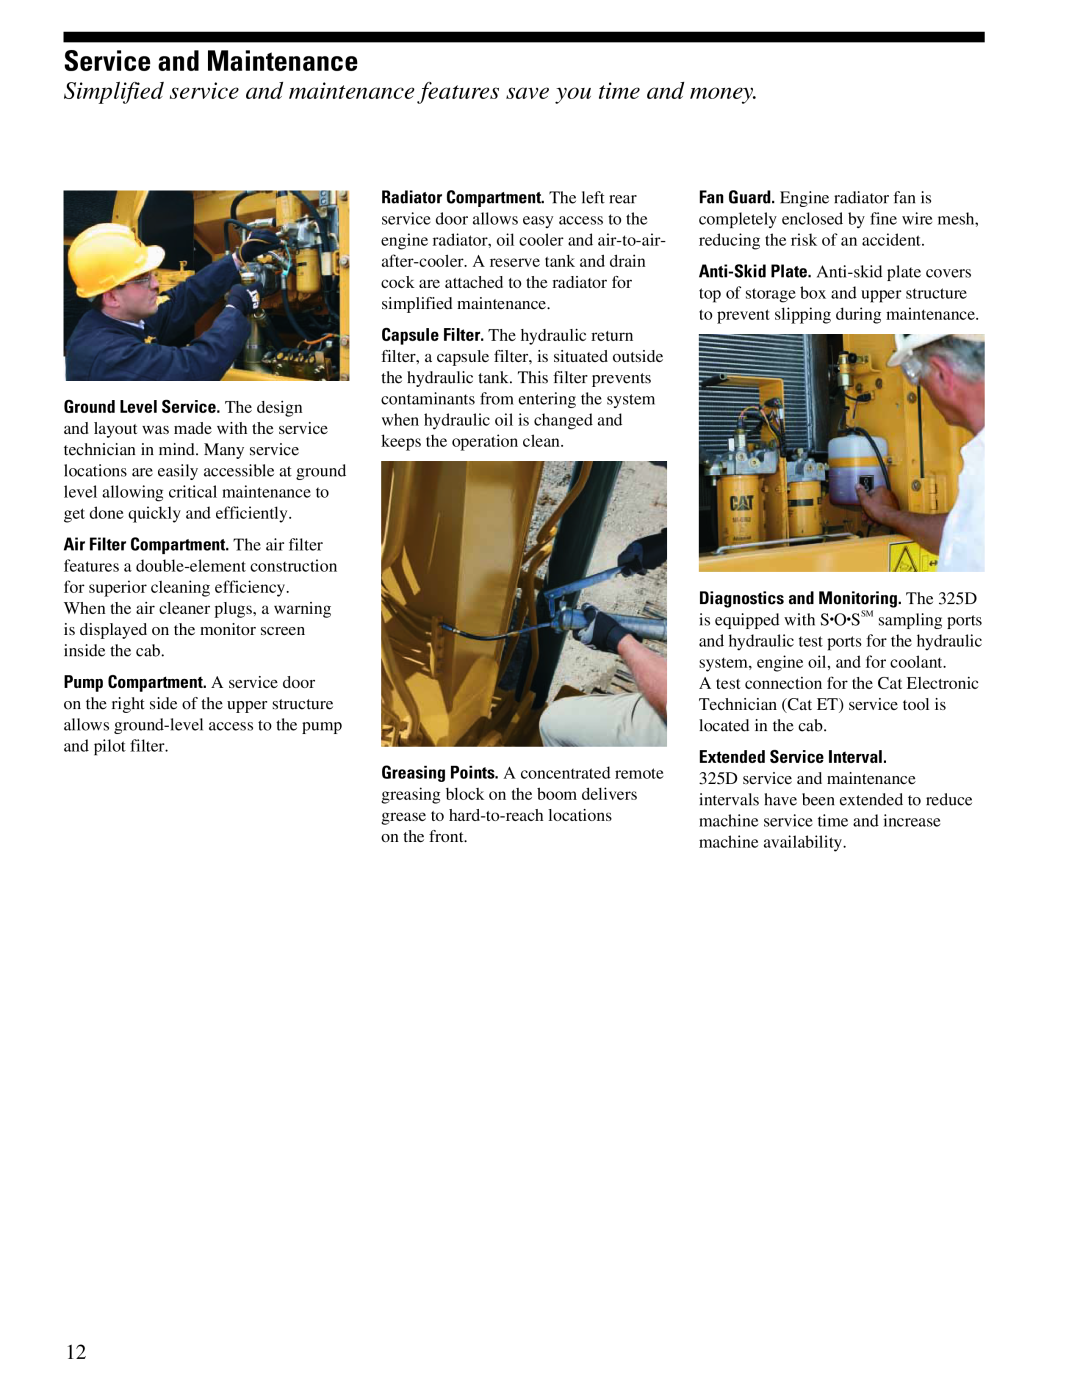 CAT 325DL manual Service and Maintenance 